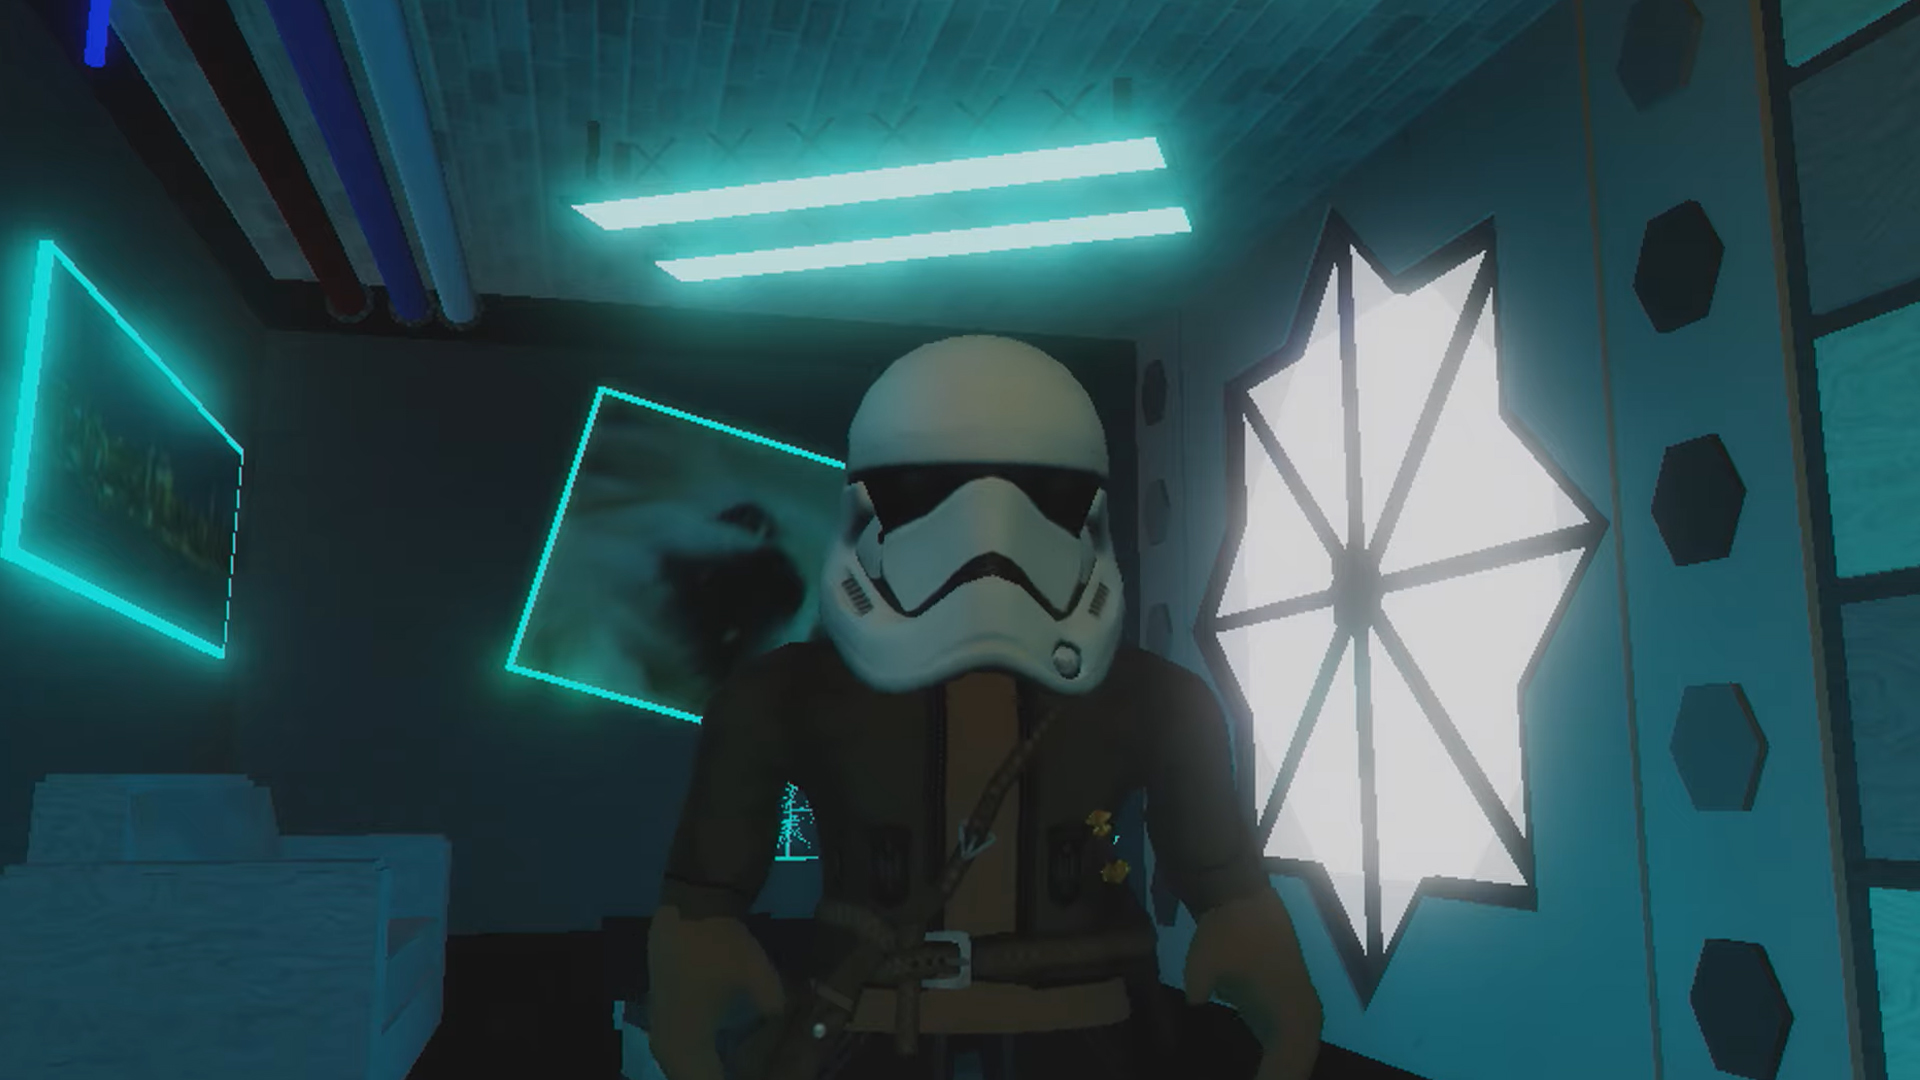 Star Wars Officially Comes To Roblox Pcgamesn - star wars creator challenge roblox game